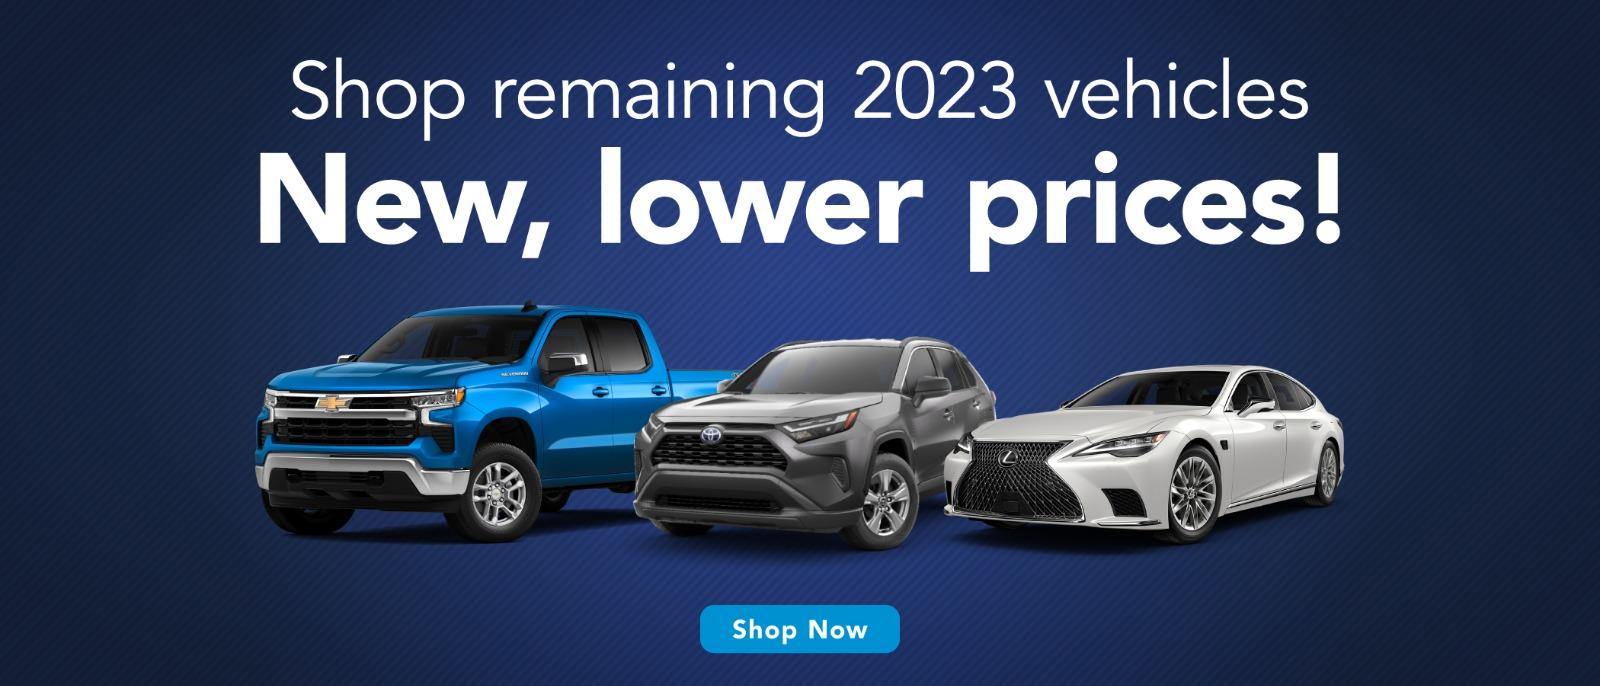 Shop remaining 2023 Vehicles. New, lower prices!